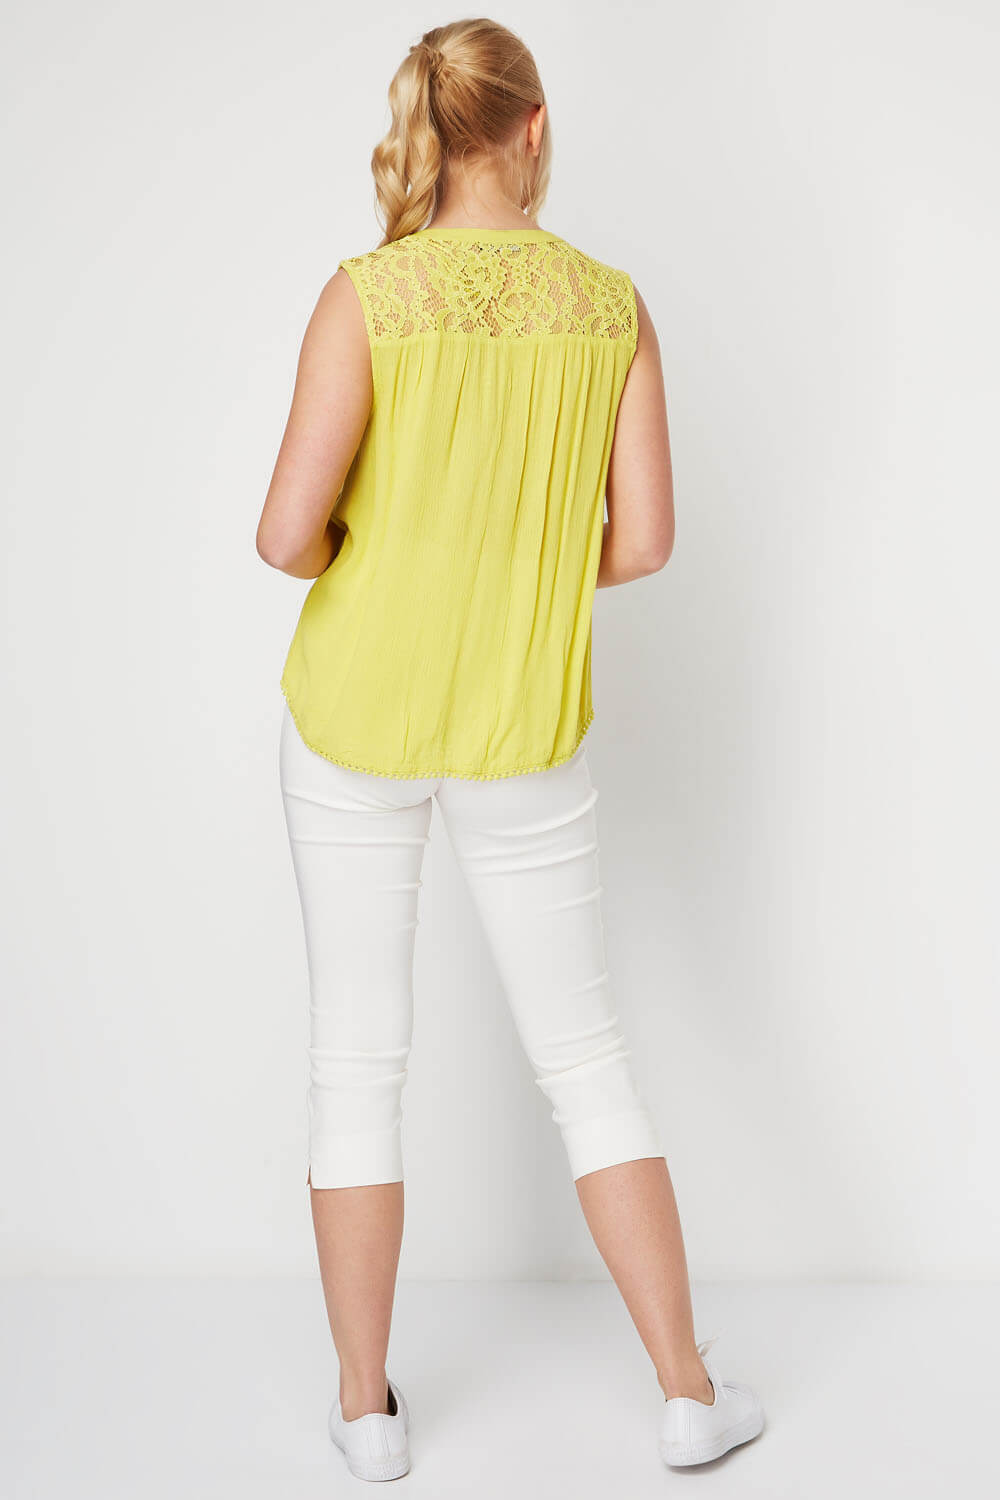 Lime Lace Insert Button Up Blouse, Image 3 of 8